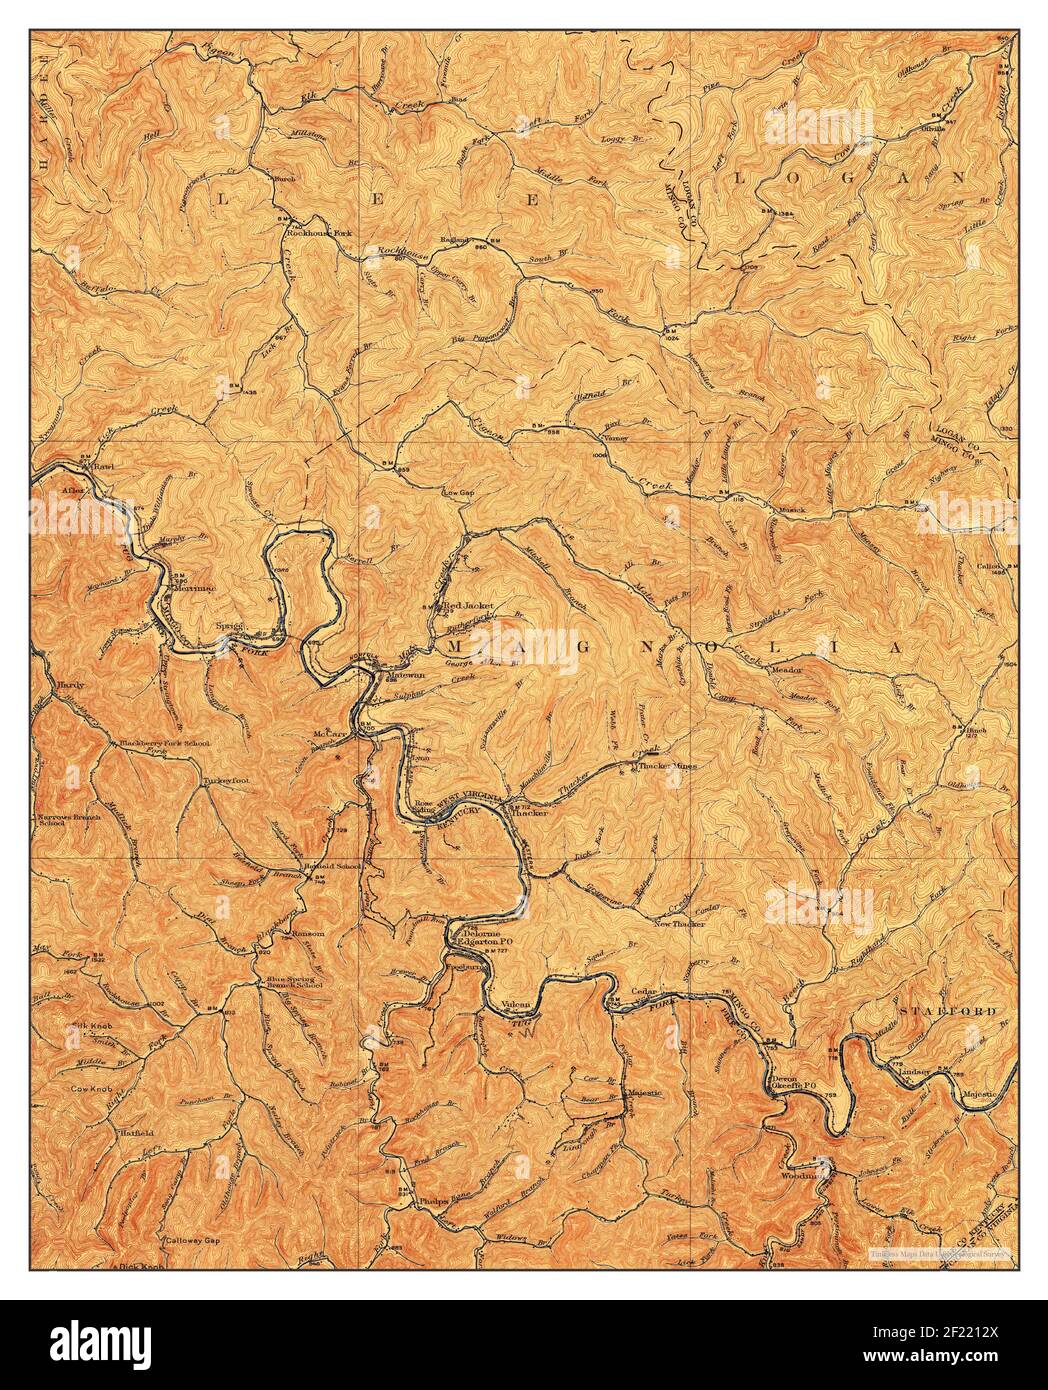 Matewan, West Virginia, map 1917, 1:62500, United States of America by Timeless Maps, data U.S. Geological Survey Stock Photo